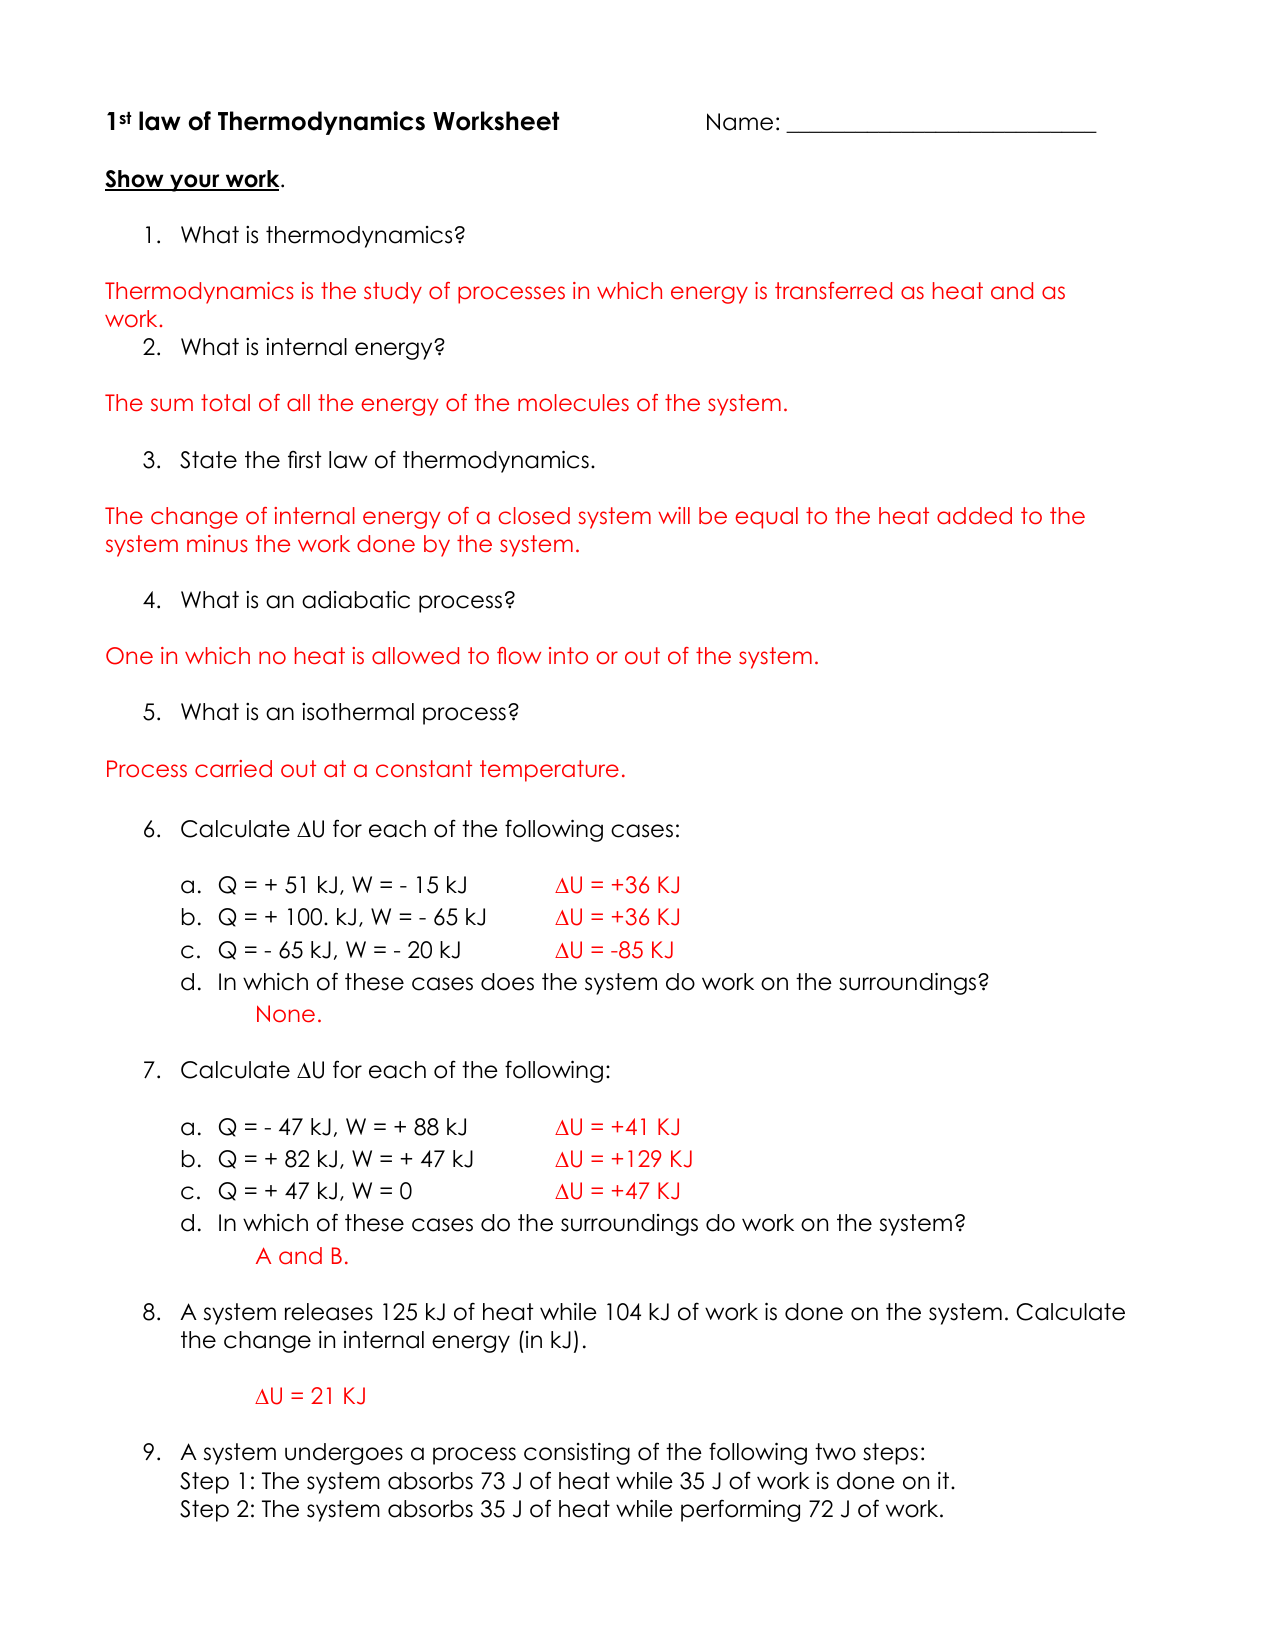  Laws Of Thermodynamics Worksheet Answers Free Download Goodimg co